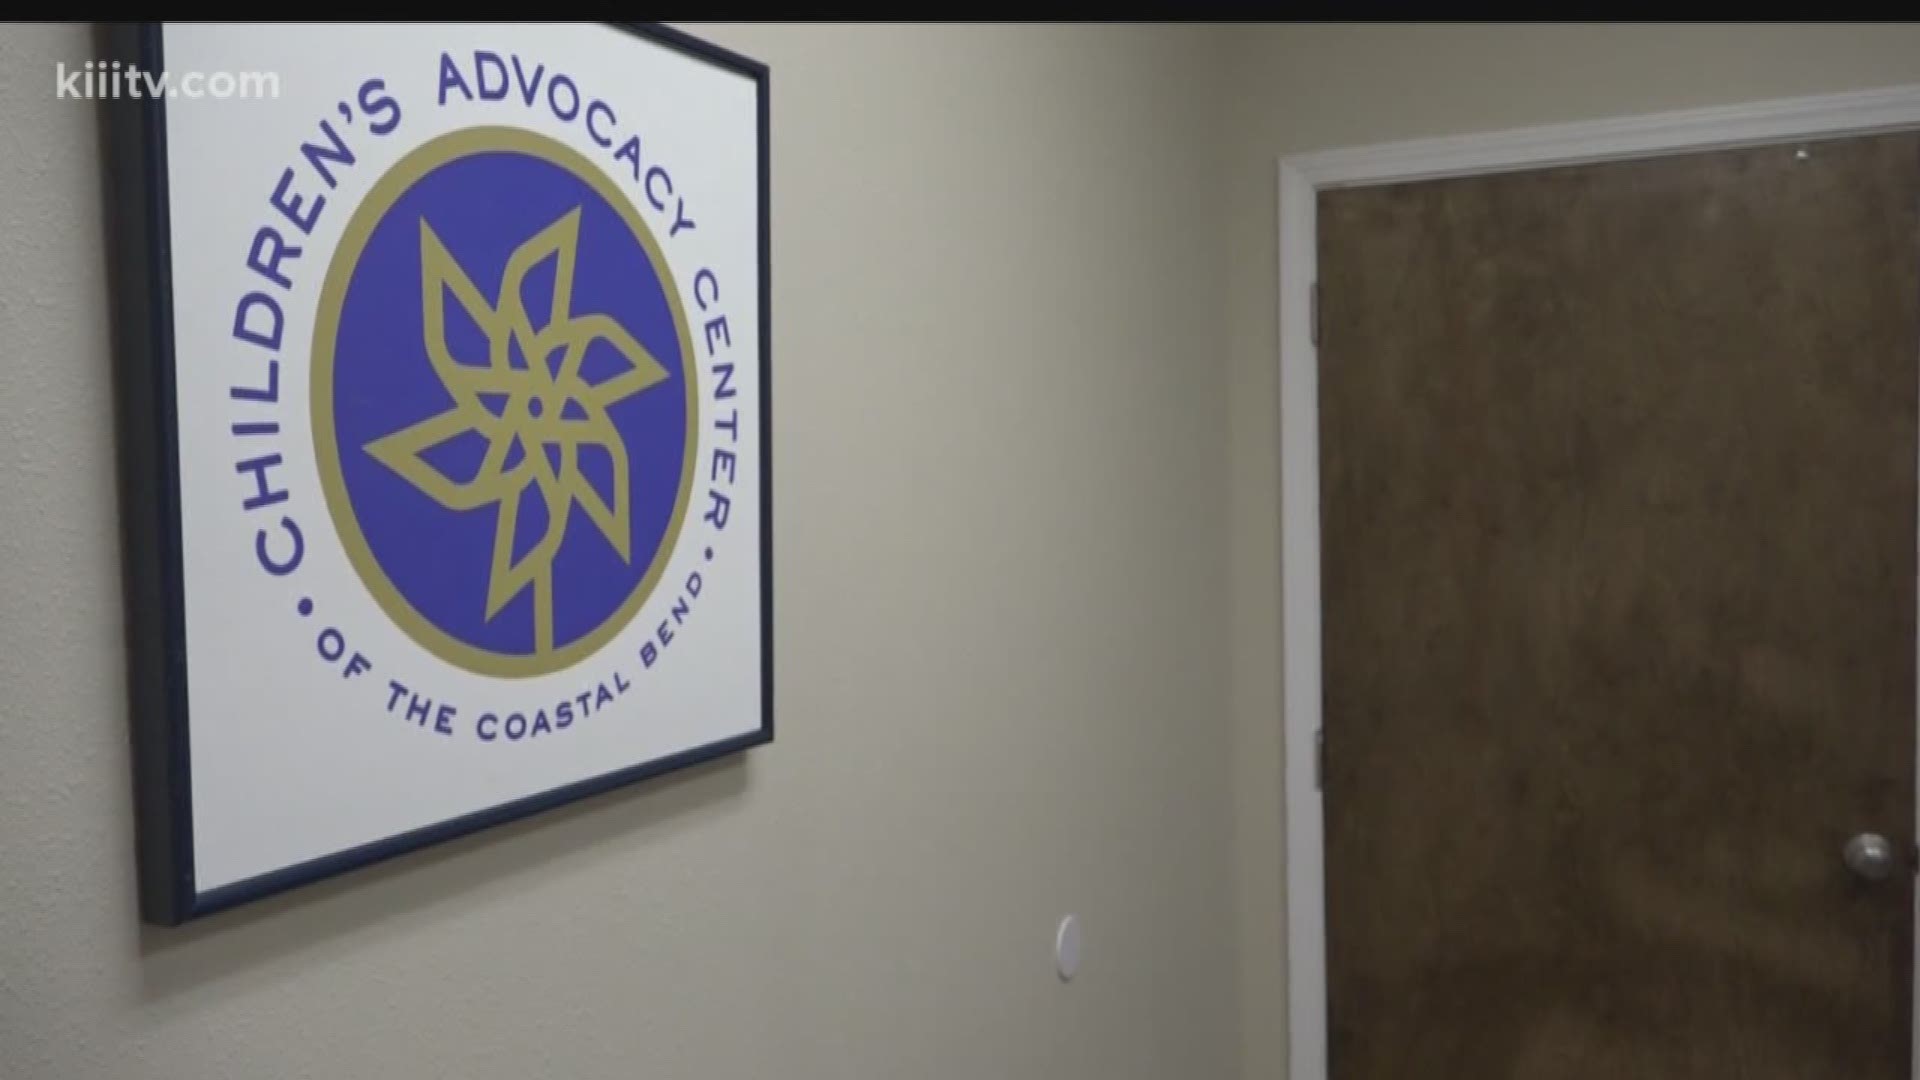 One of the charities benefiting from the Coastal Bend Day of Giving is the Children's Advocacy Center of the Coastal Bend, a group that helps children who have just got out of abusive and neglectful situations.